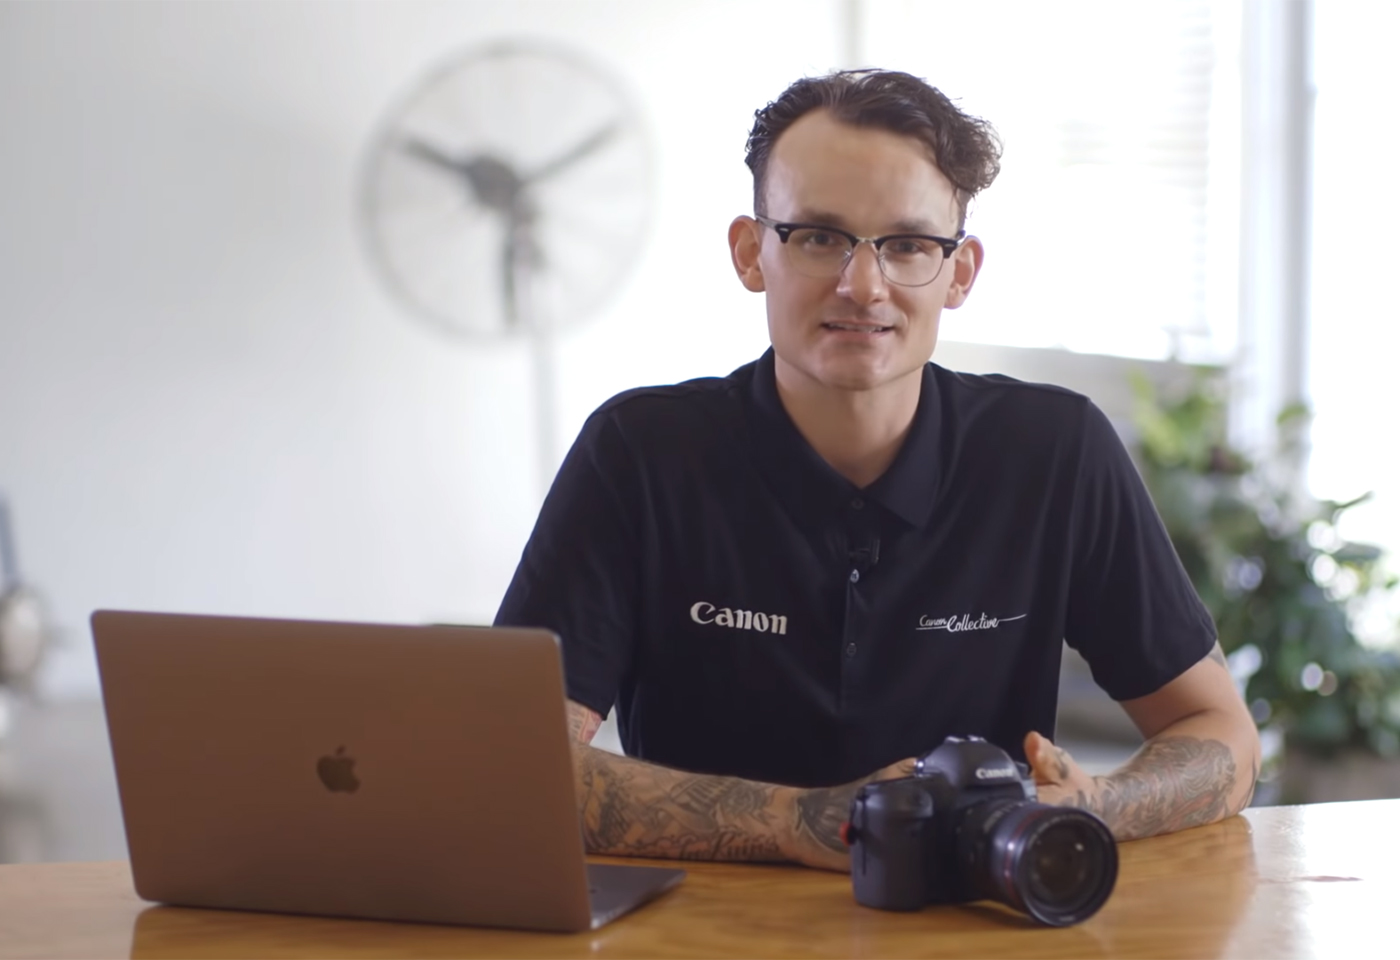 How to Set Up Your Camera to Shoot Video